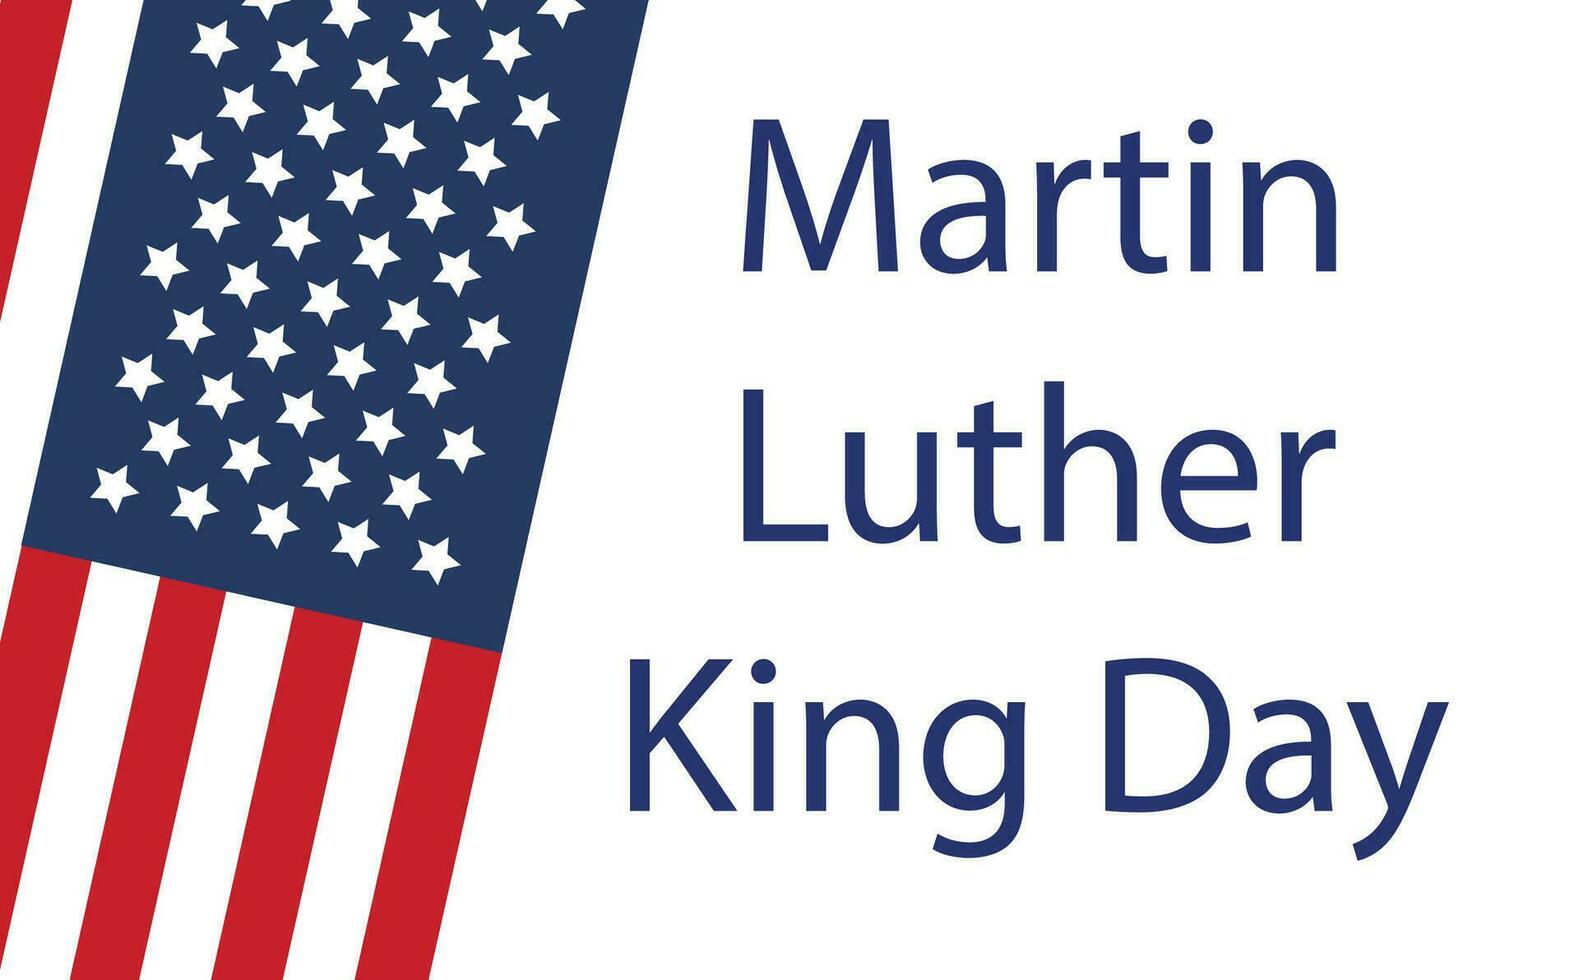 Martin Luther King Jr. Day greeting card design. MLK Day lettering inspirational quote, US flag background vector